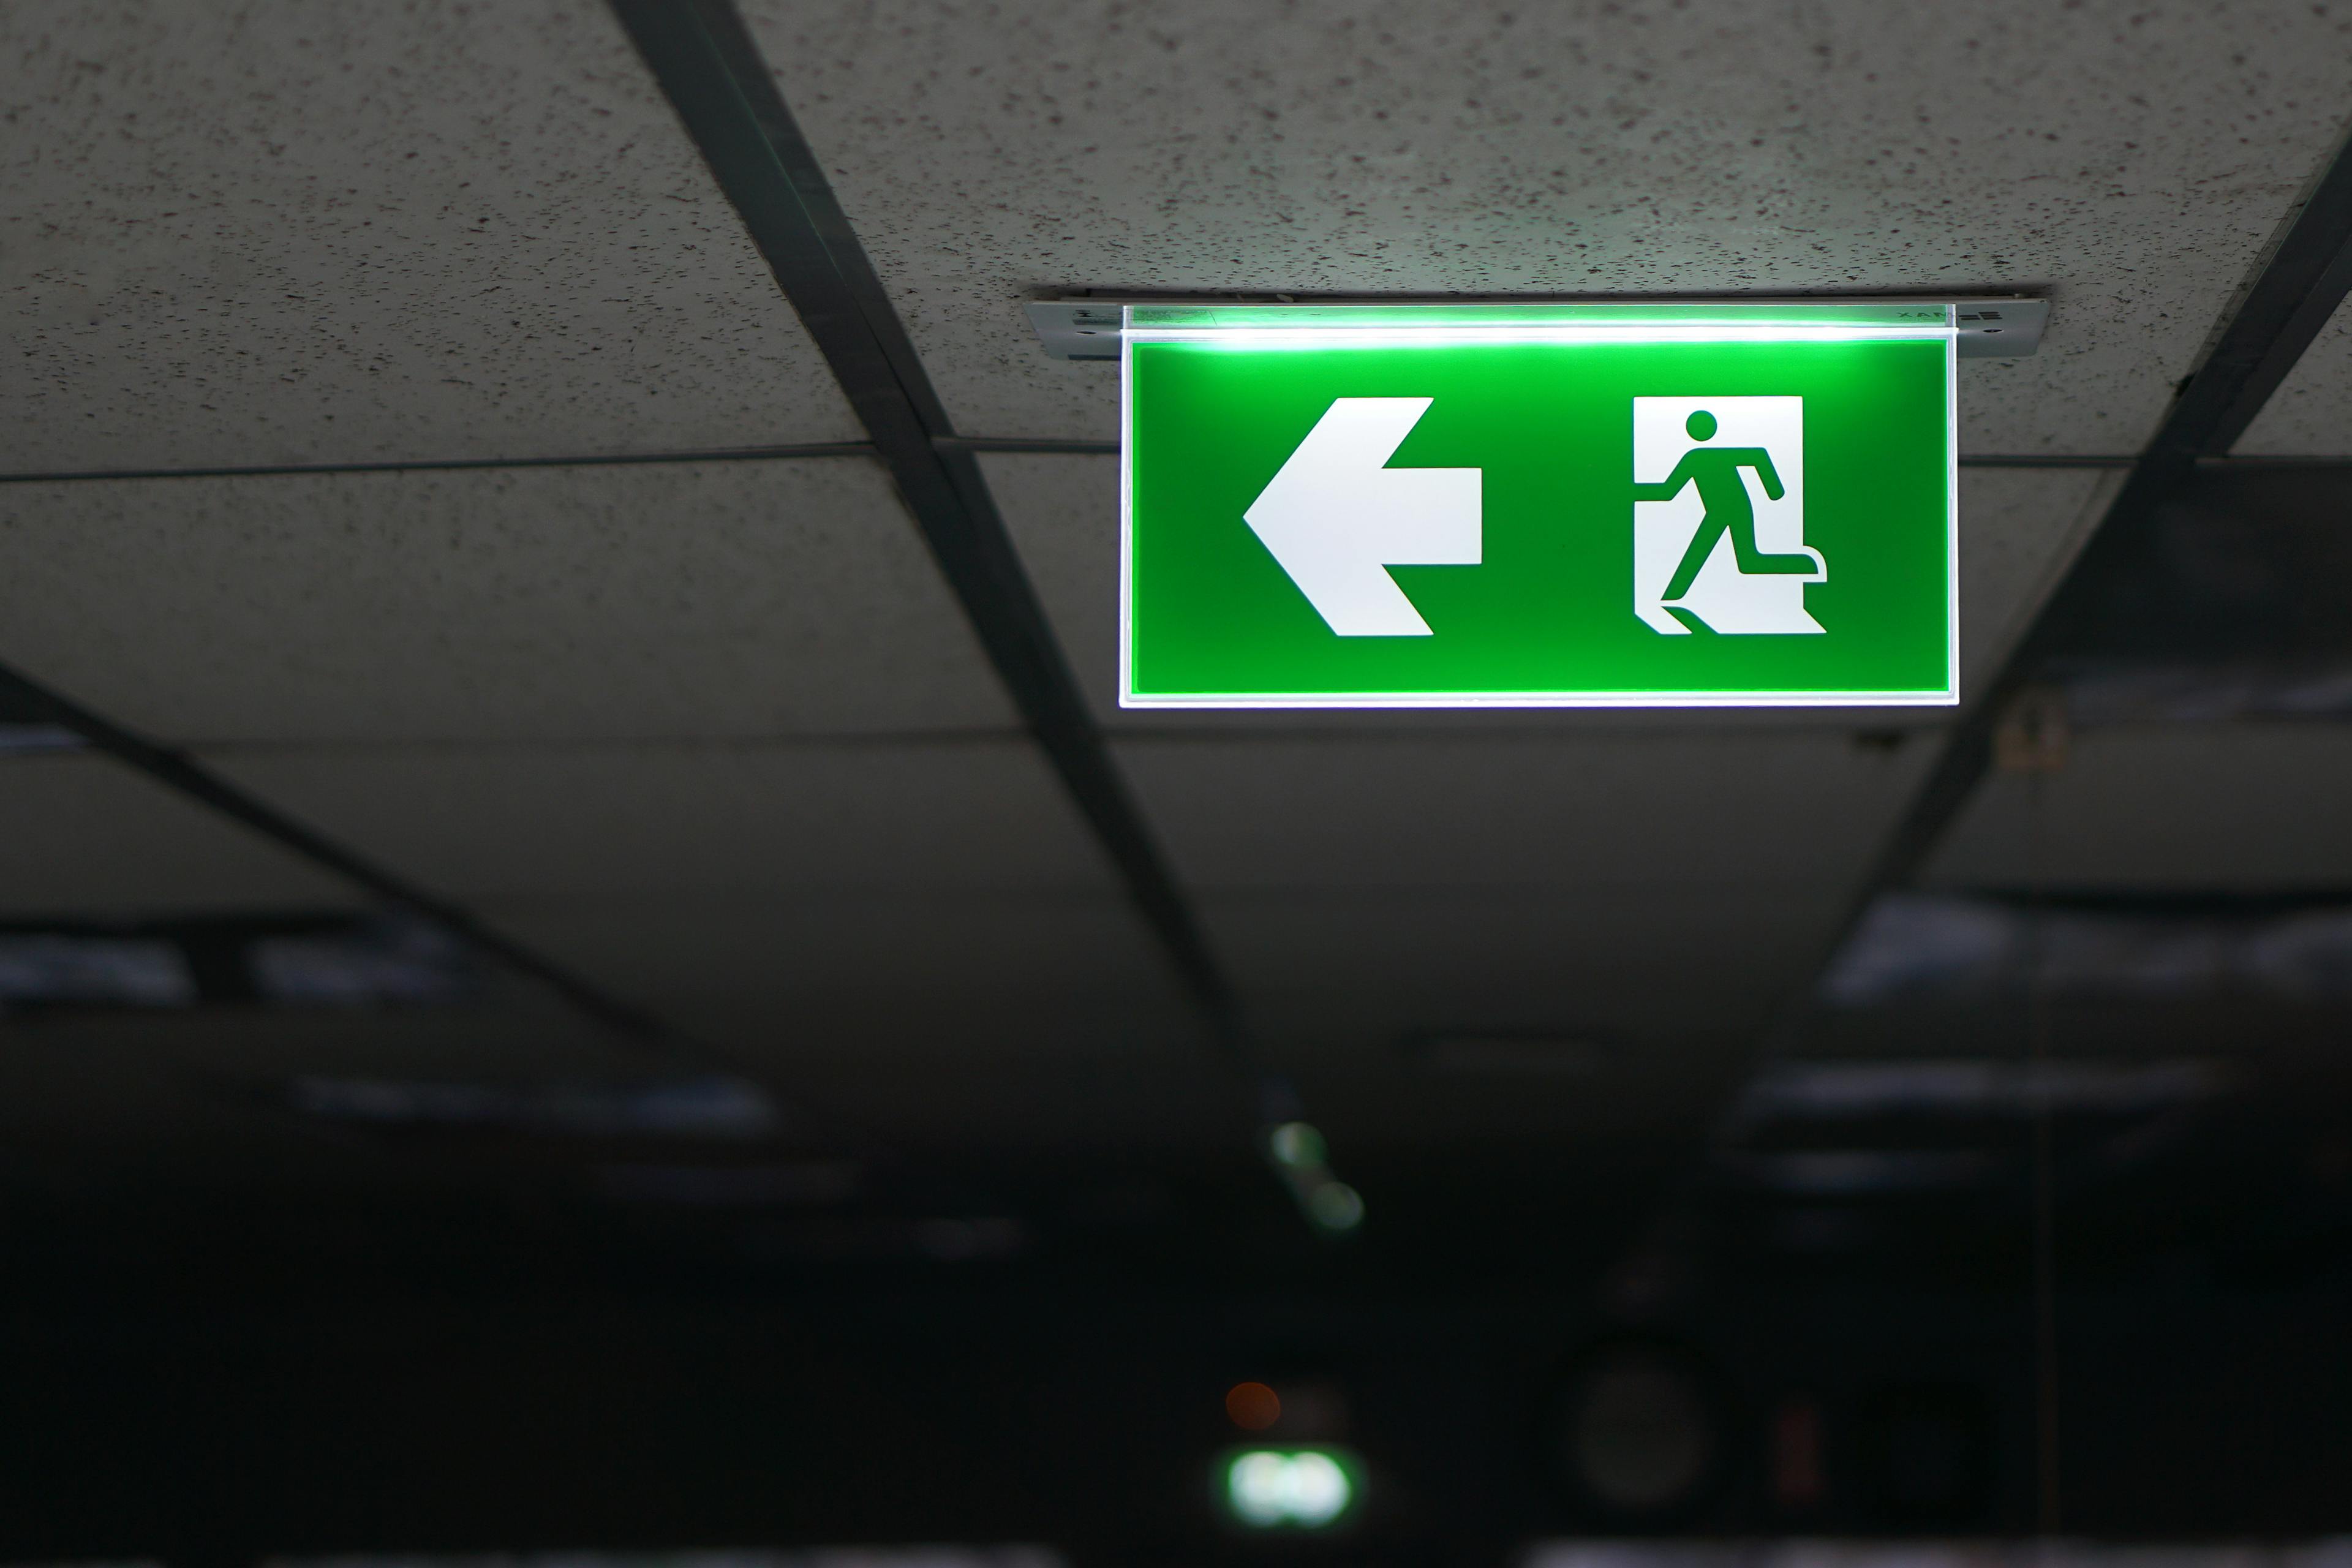 An image related to Emergency & Exit Lighting